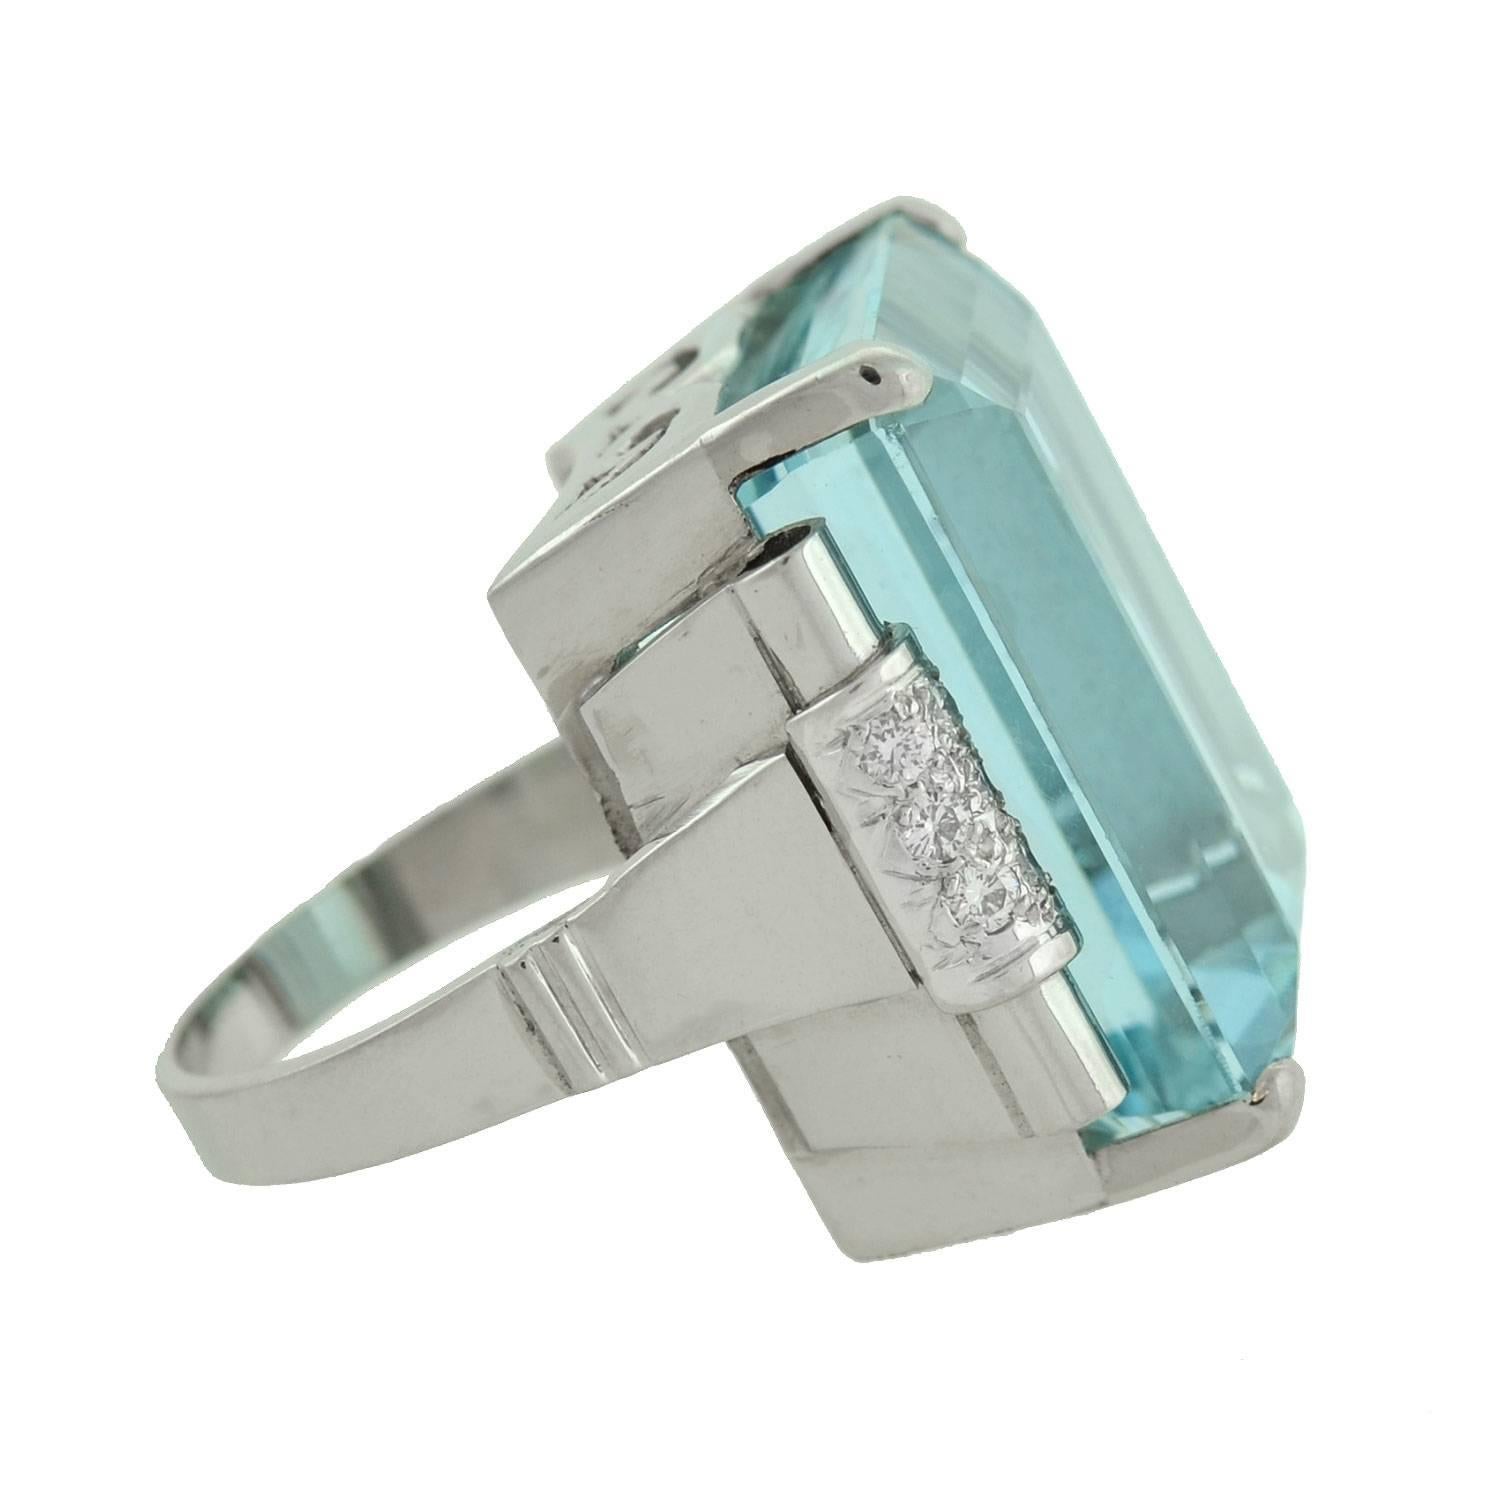 A simply stunning aquamarine cocktail ring from the Retro (ca1940) era! This fabulous piece is made of platinum and holds a large Emerald Cut aquamarine stone at its center. The aqua, which is prong set, has a total approximate weight of 33 carats